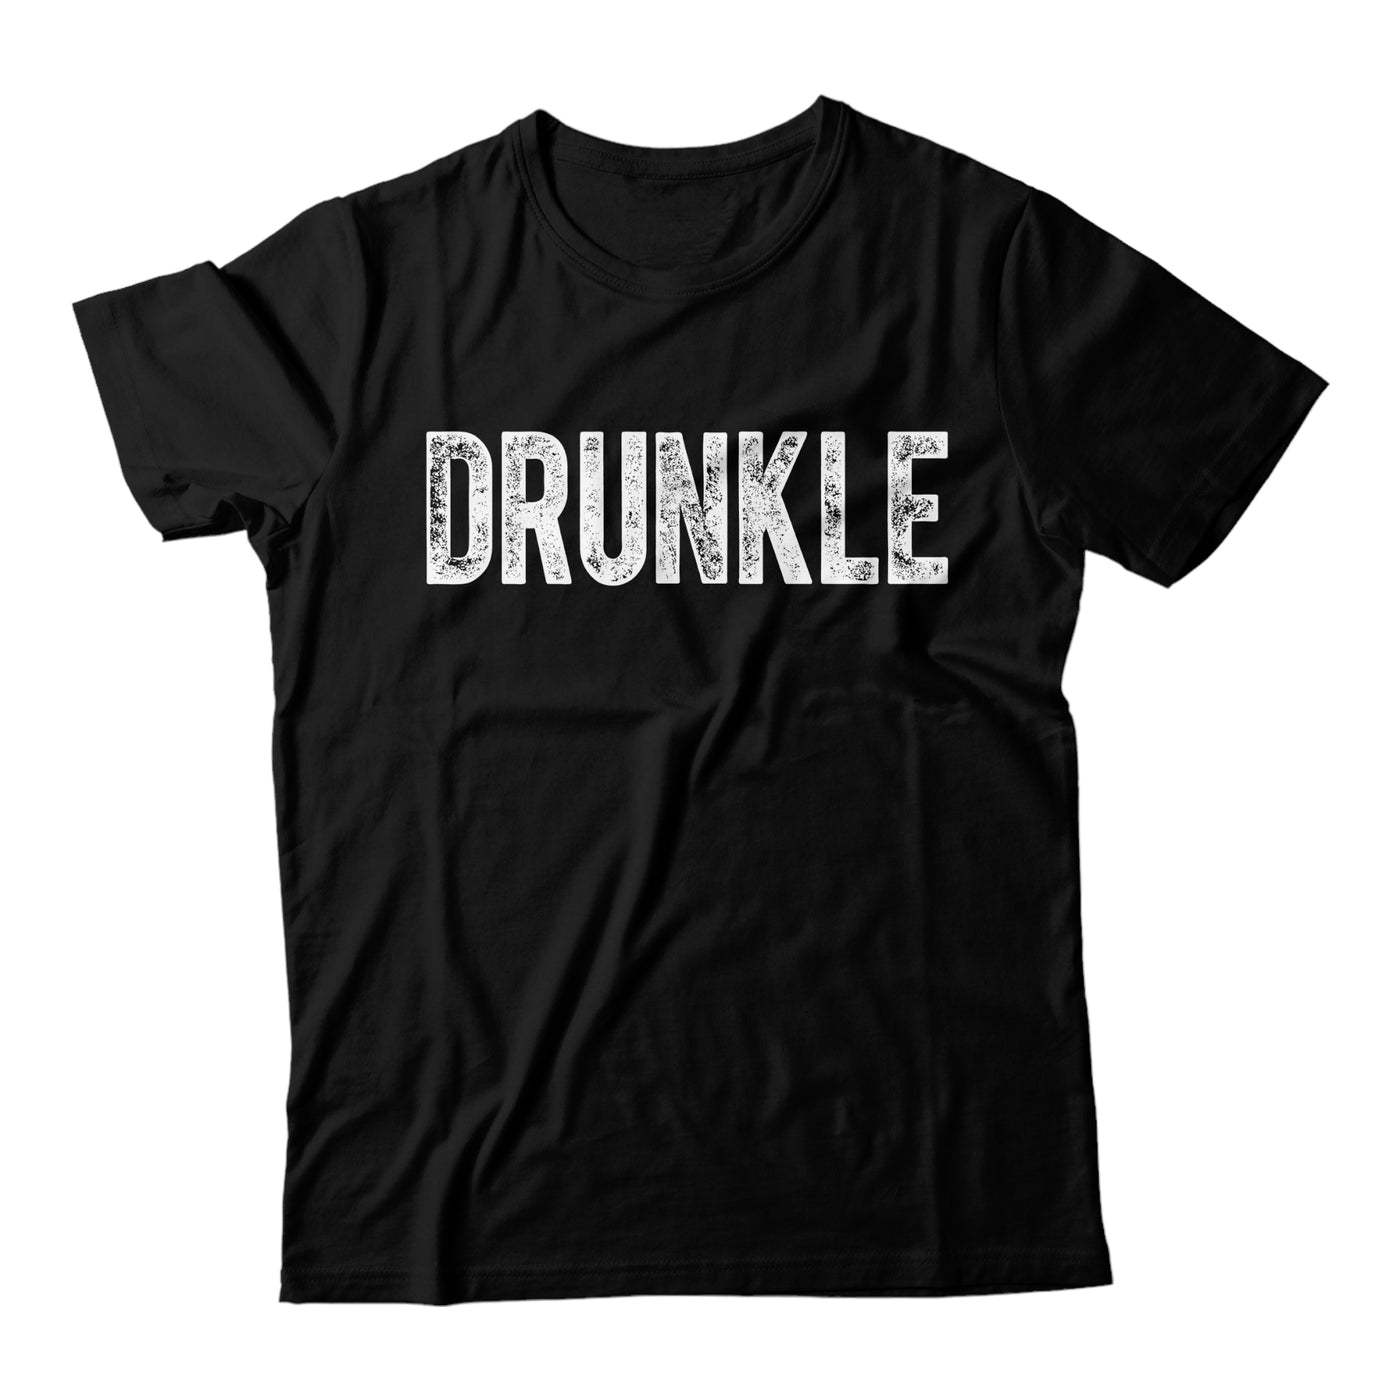 Drunkle T-shirt